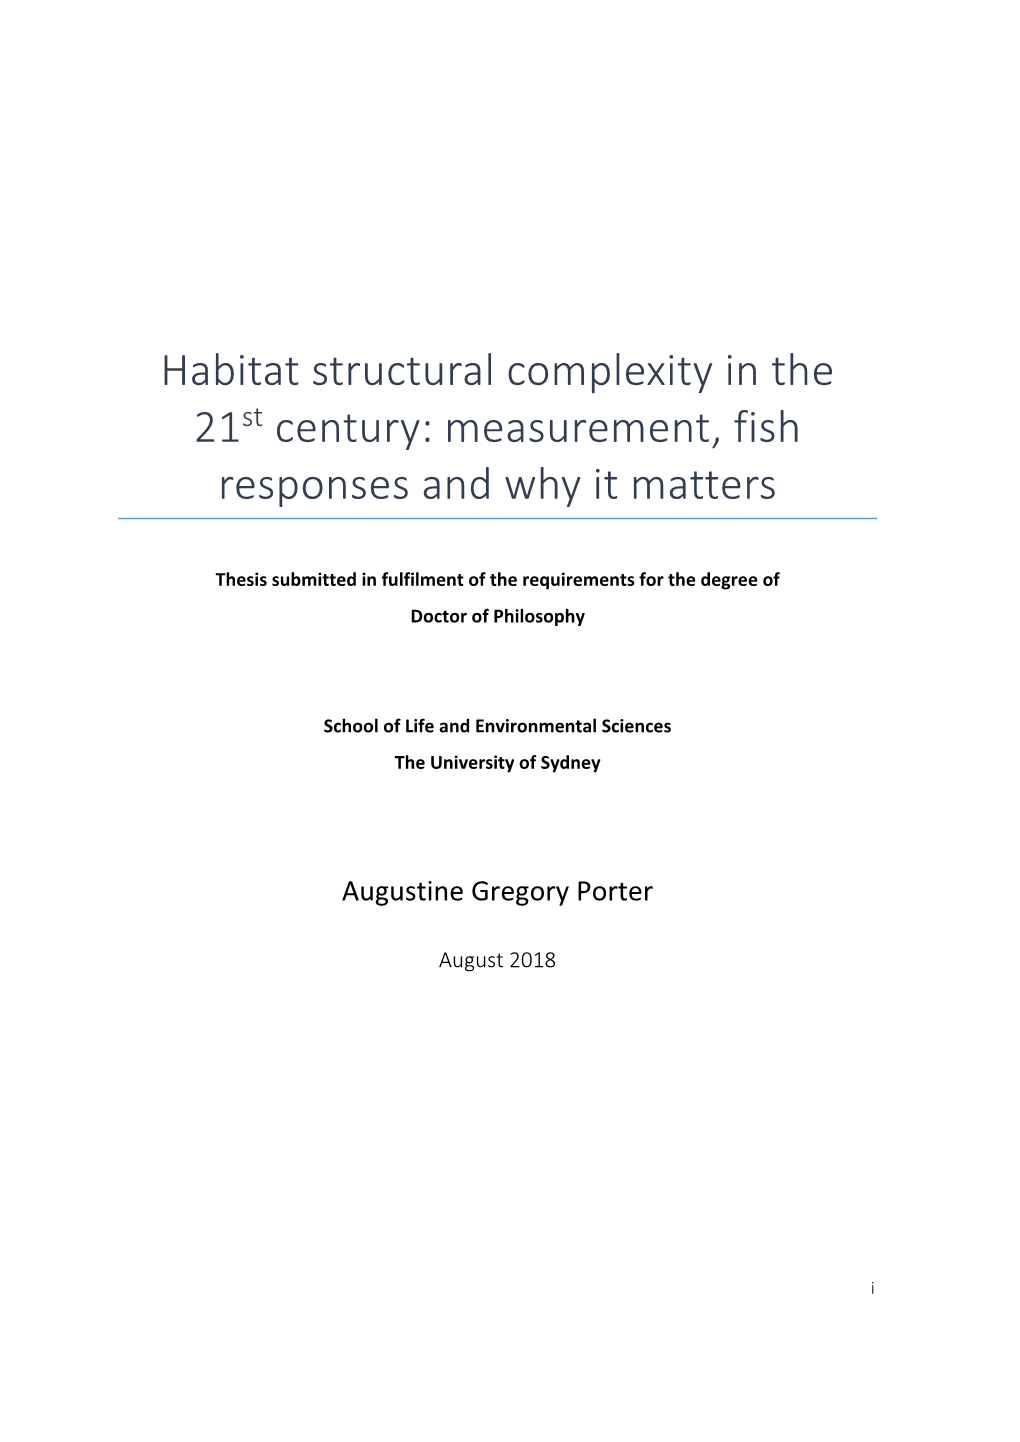 Habitat Structural Complexity in the 21St Century: Measurement, Fish Responses and Why It Matters